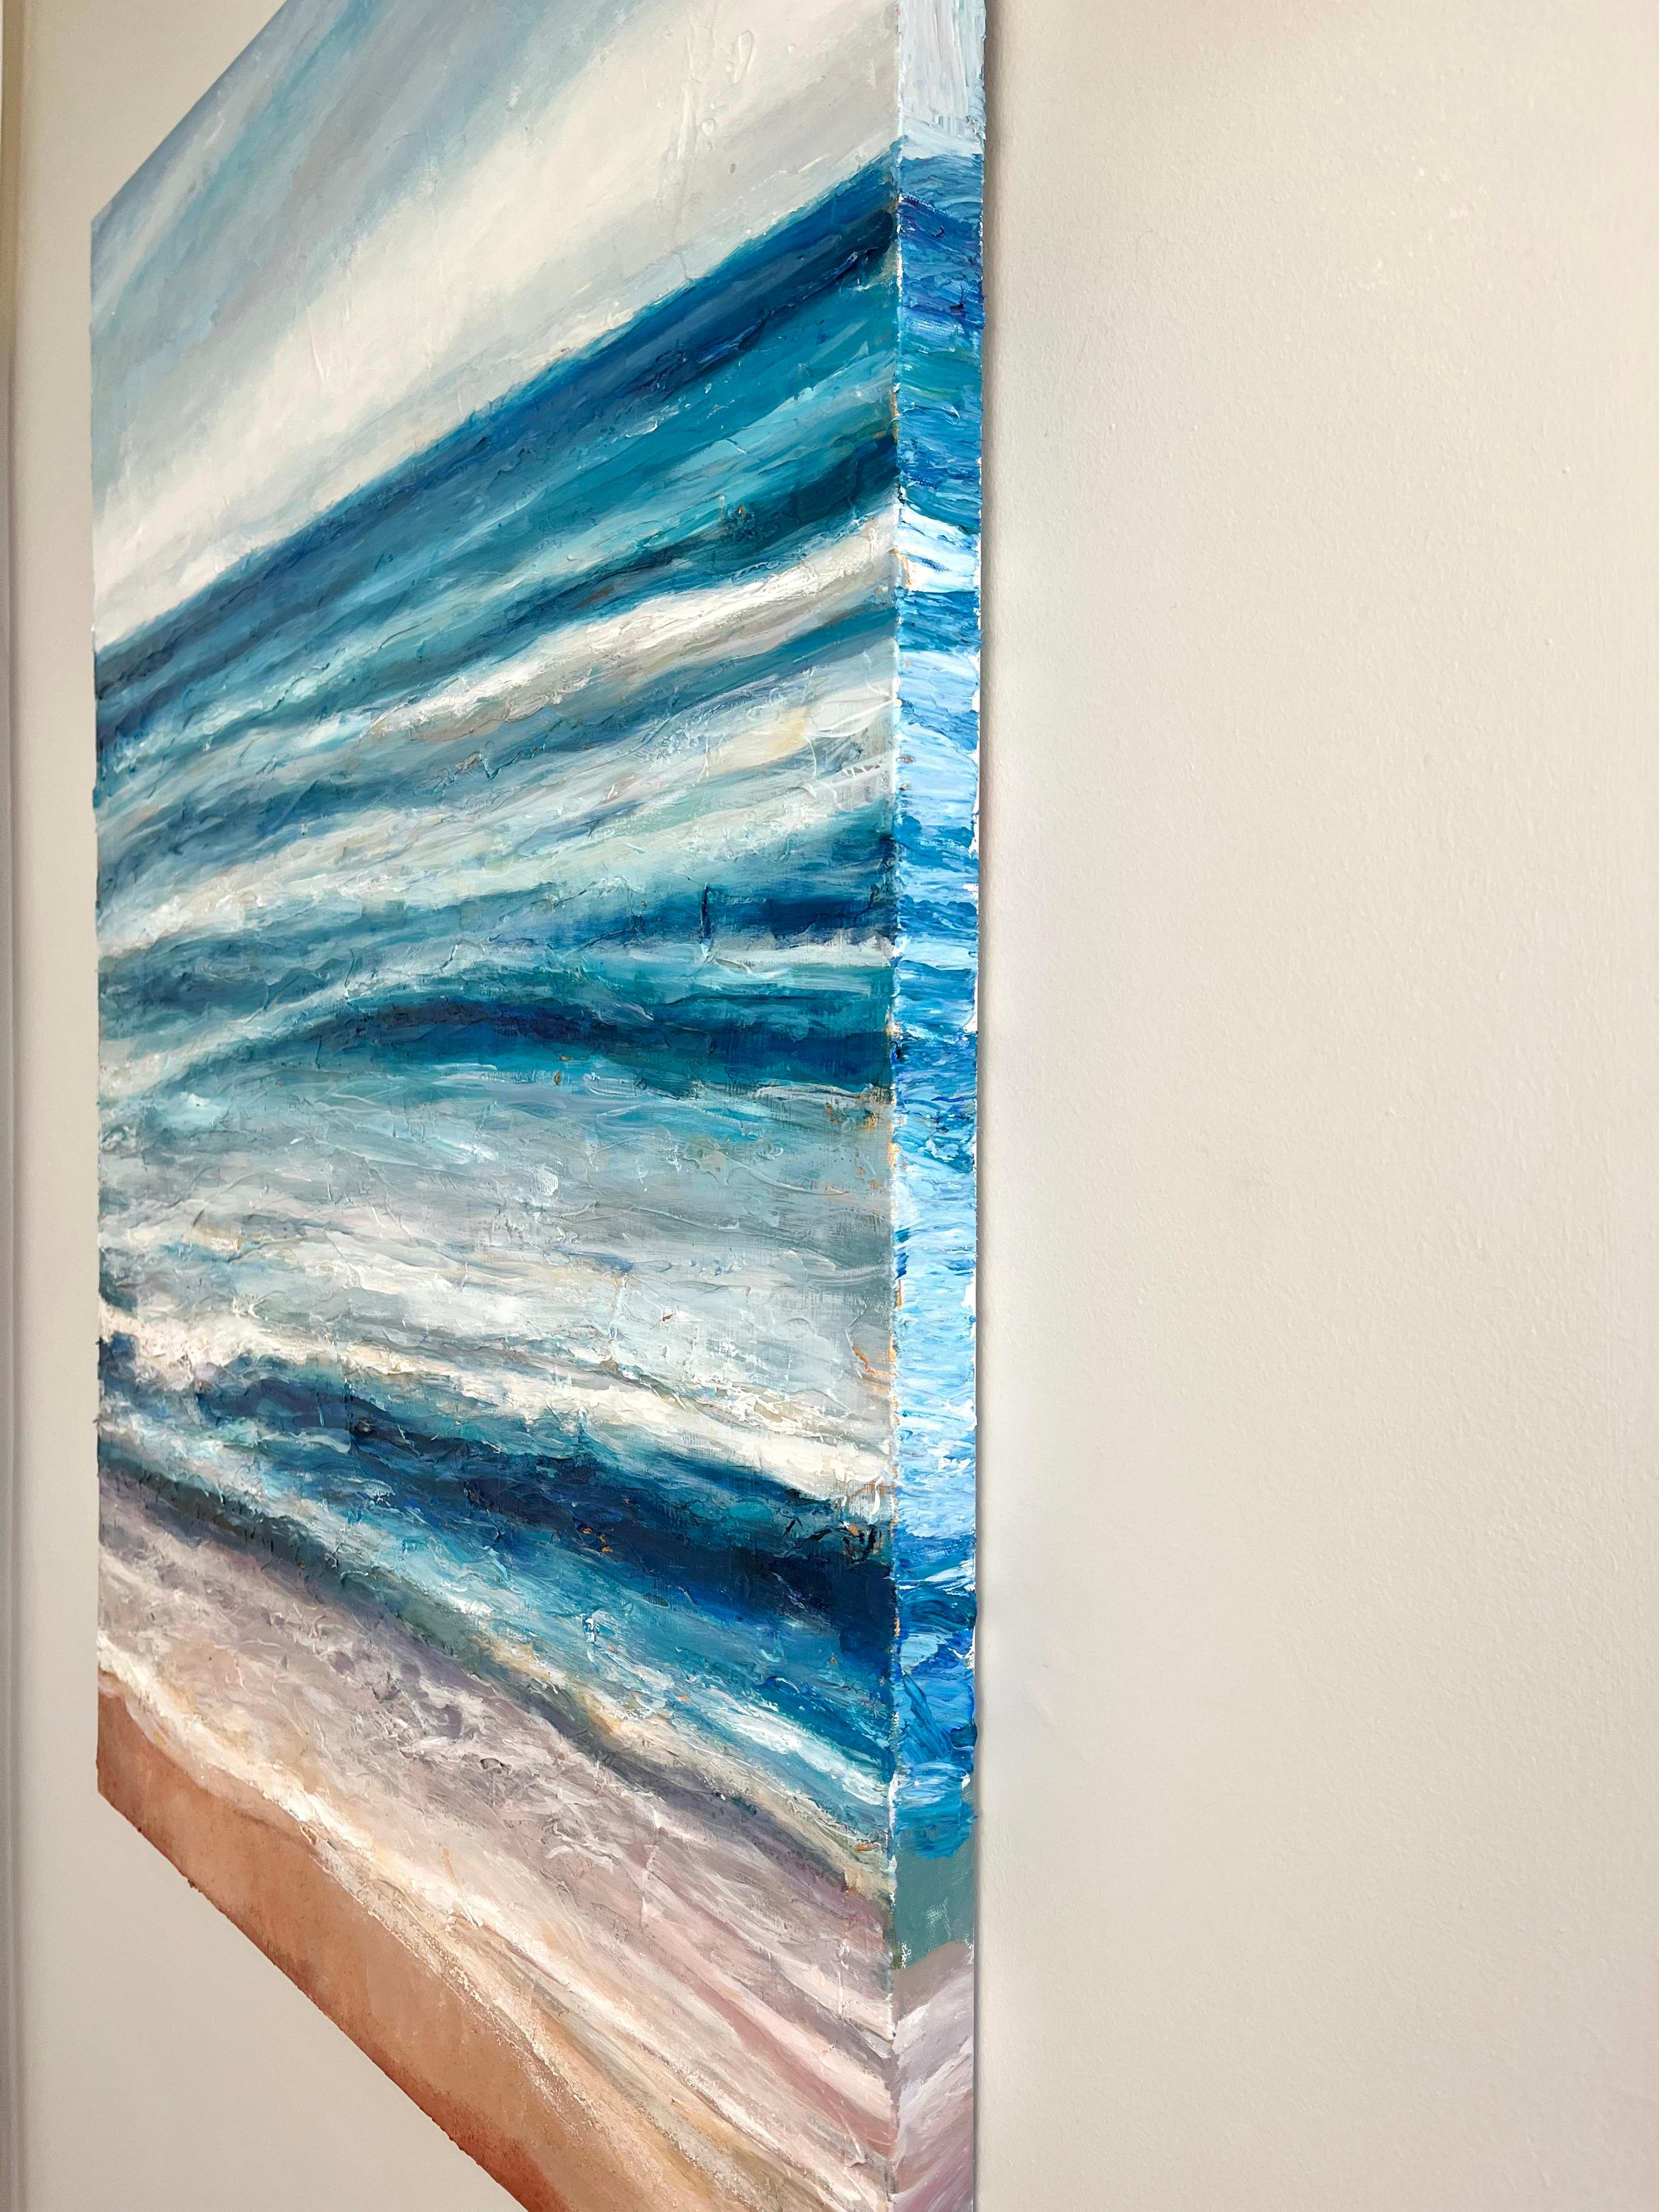 <p>Artist Comments<br>Relaxing waves smoothly drift along artist Nava Lundy's tranquil seascape. The direct view renders the composition in an abstract style. Thick impasto paint mimics the energy and movement of the ocean. Nava incorporates sand to